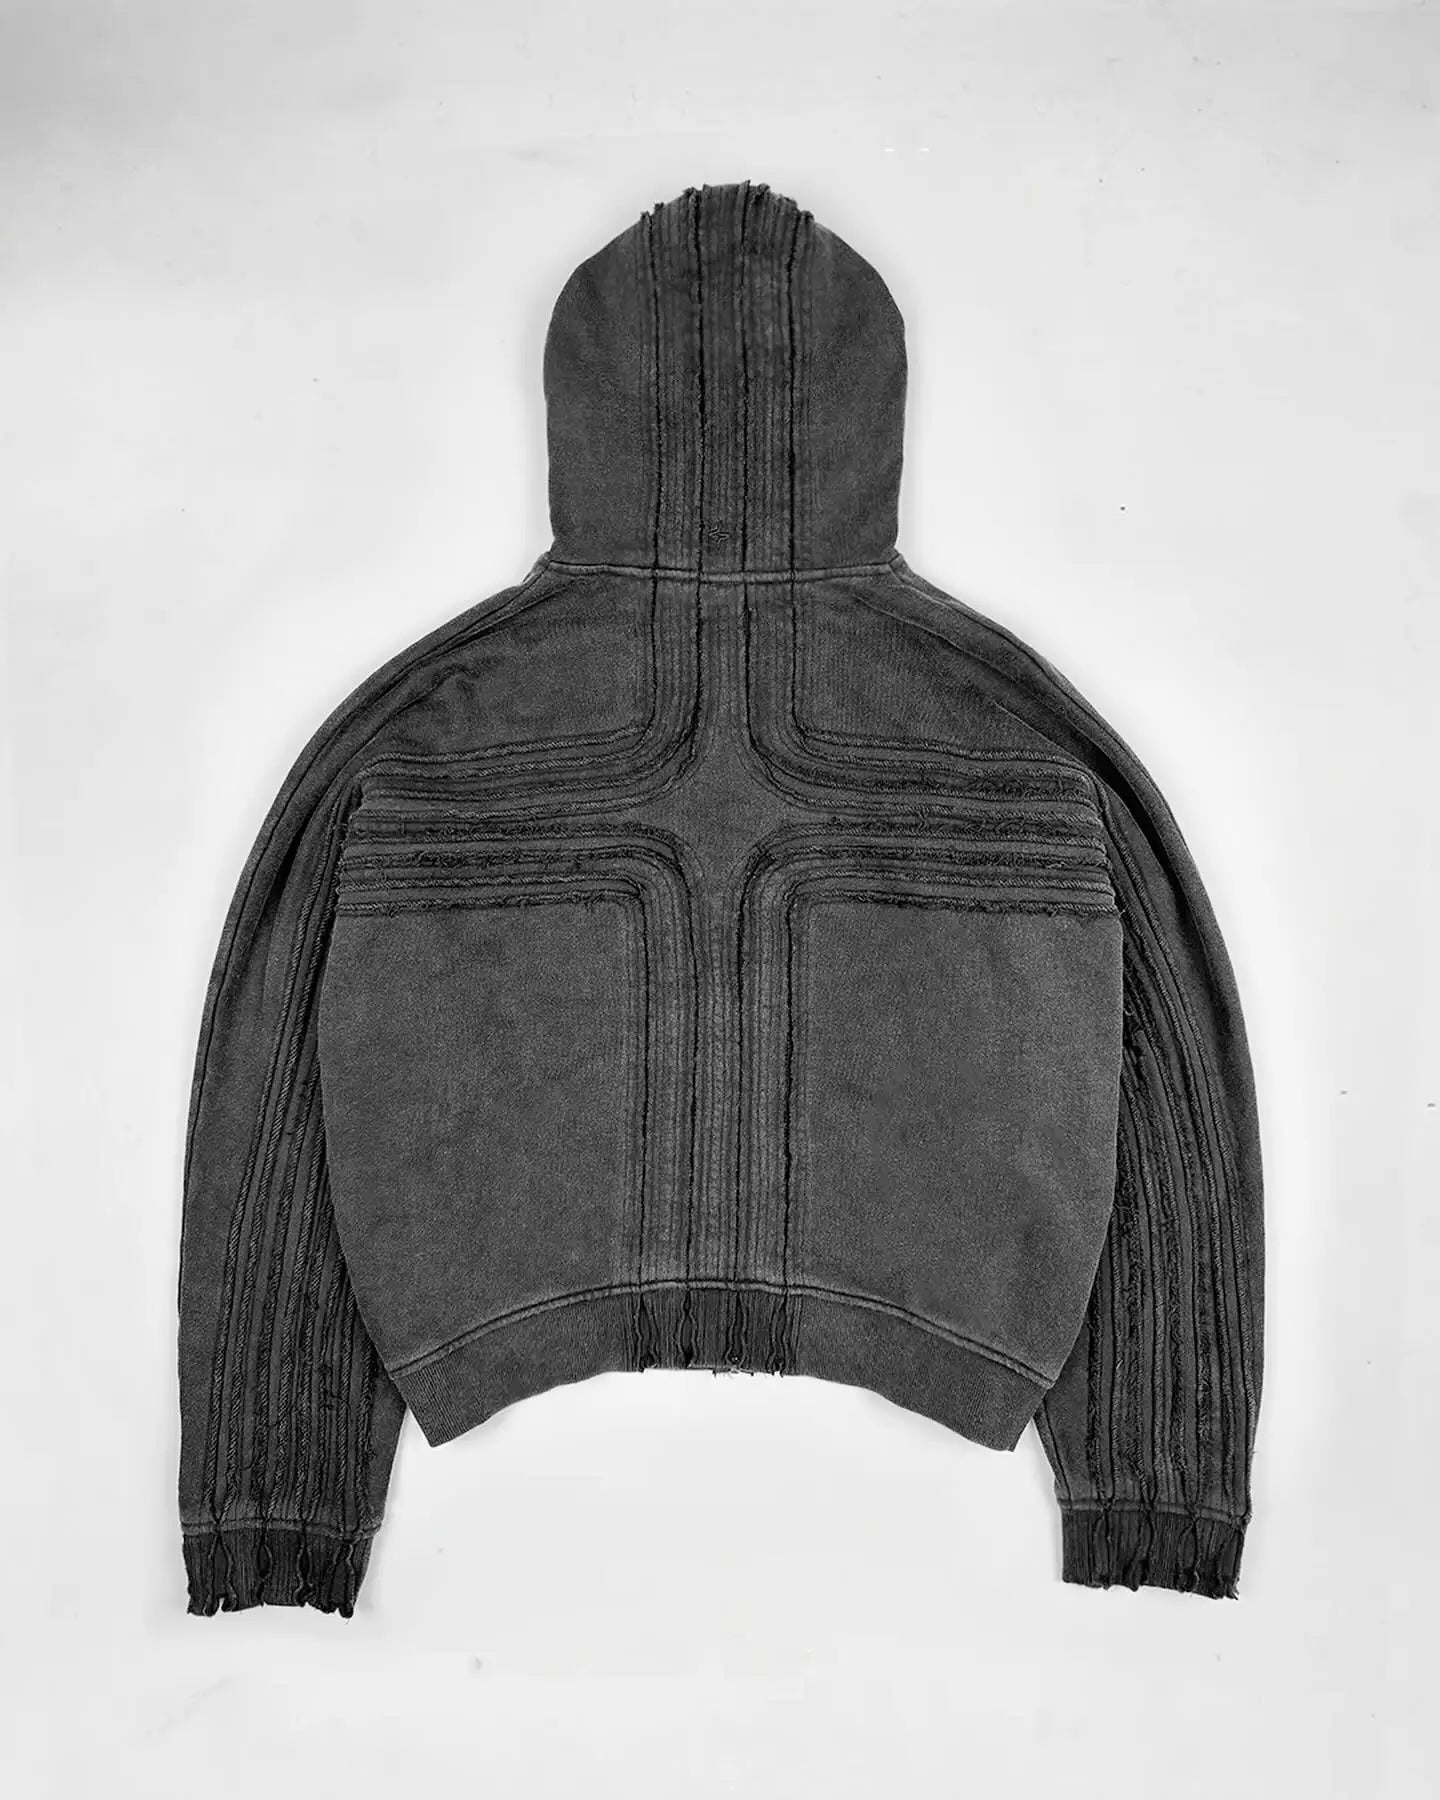 A Maramalive™ Y2k Hoodie Goth Hip Hop Oversized Loose Zip Up Hoodie Casual Harajuku Black Patchwork Long Sleeve Pullover Men Women Streetwear featuring an intricate stitched design on the back, showcasing symmetrical lines forming a grid-like pattern. The image is centered on a white background.